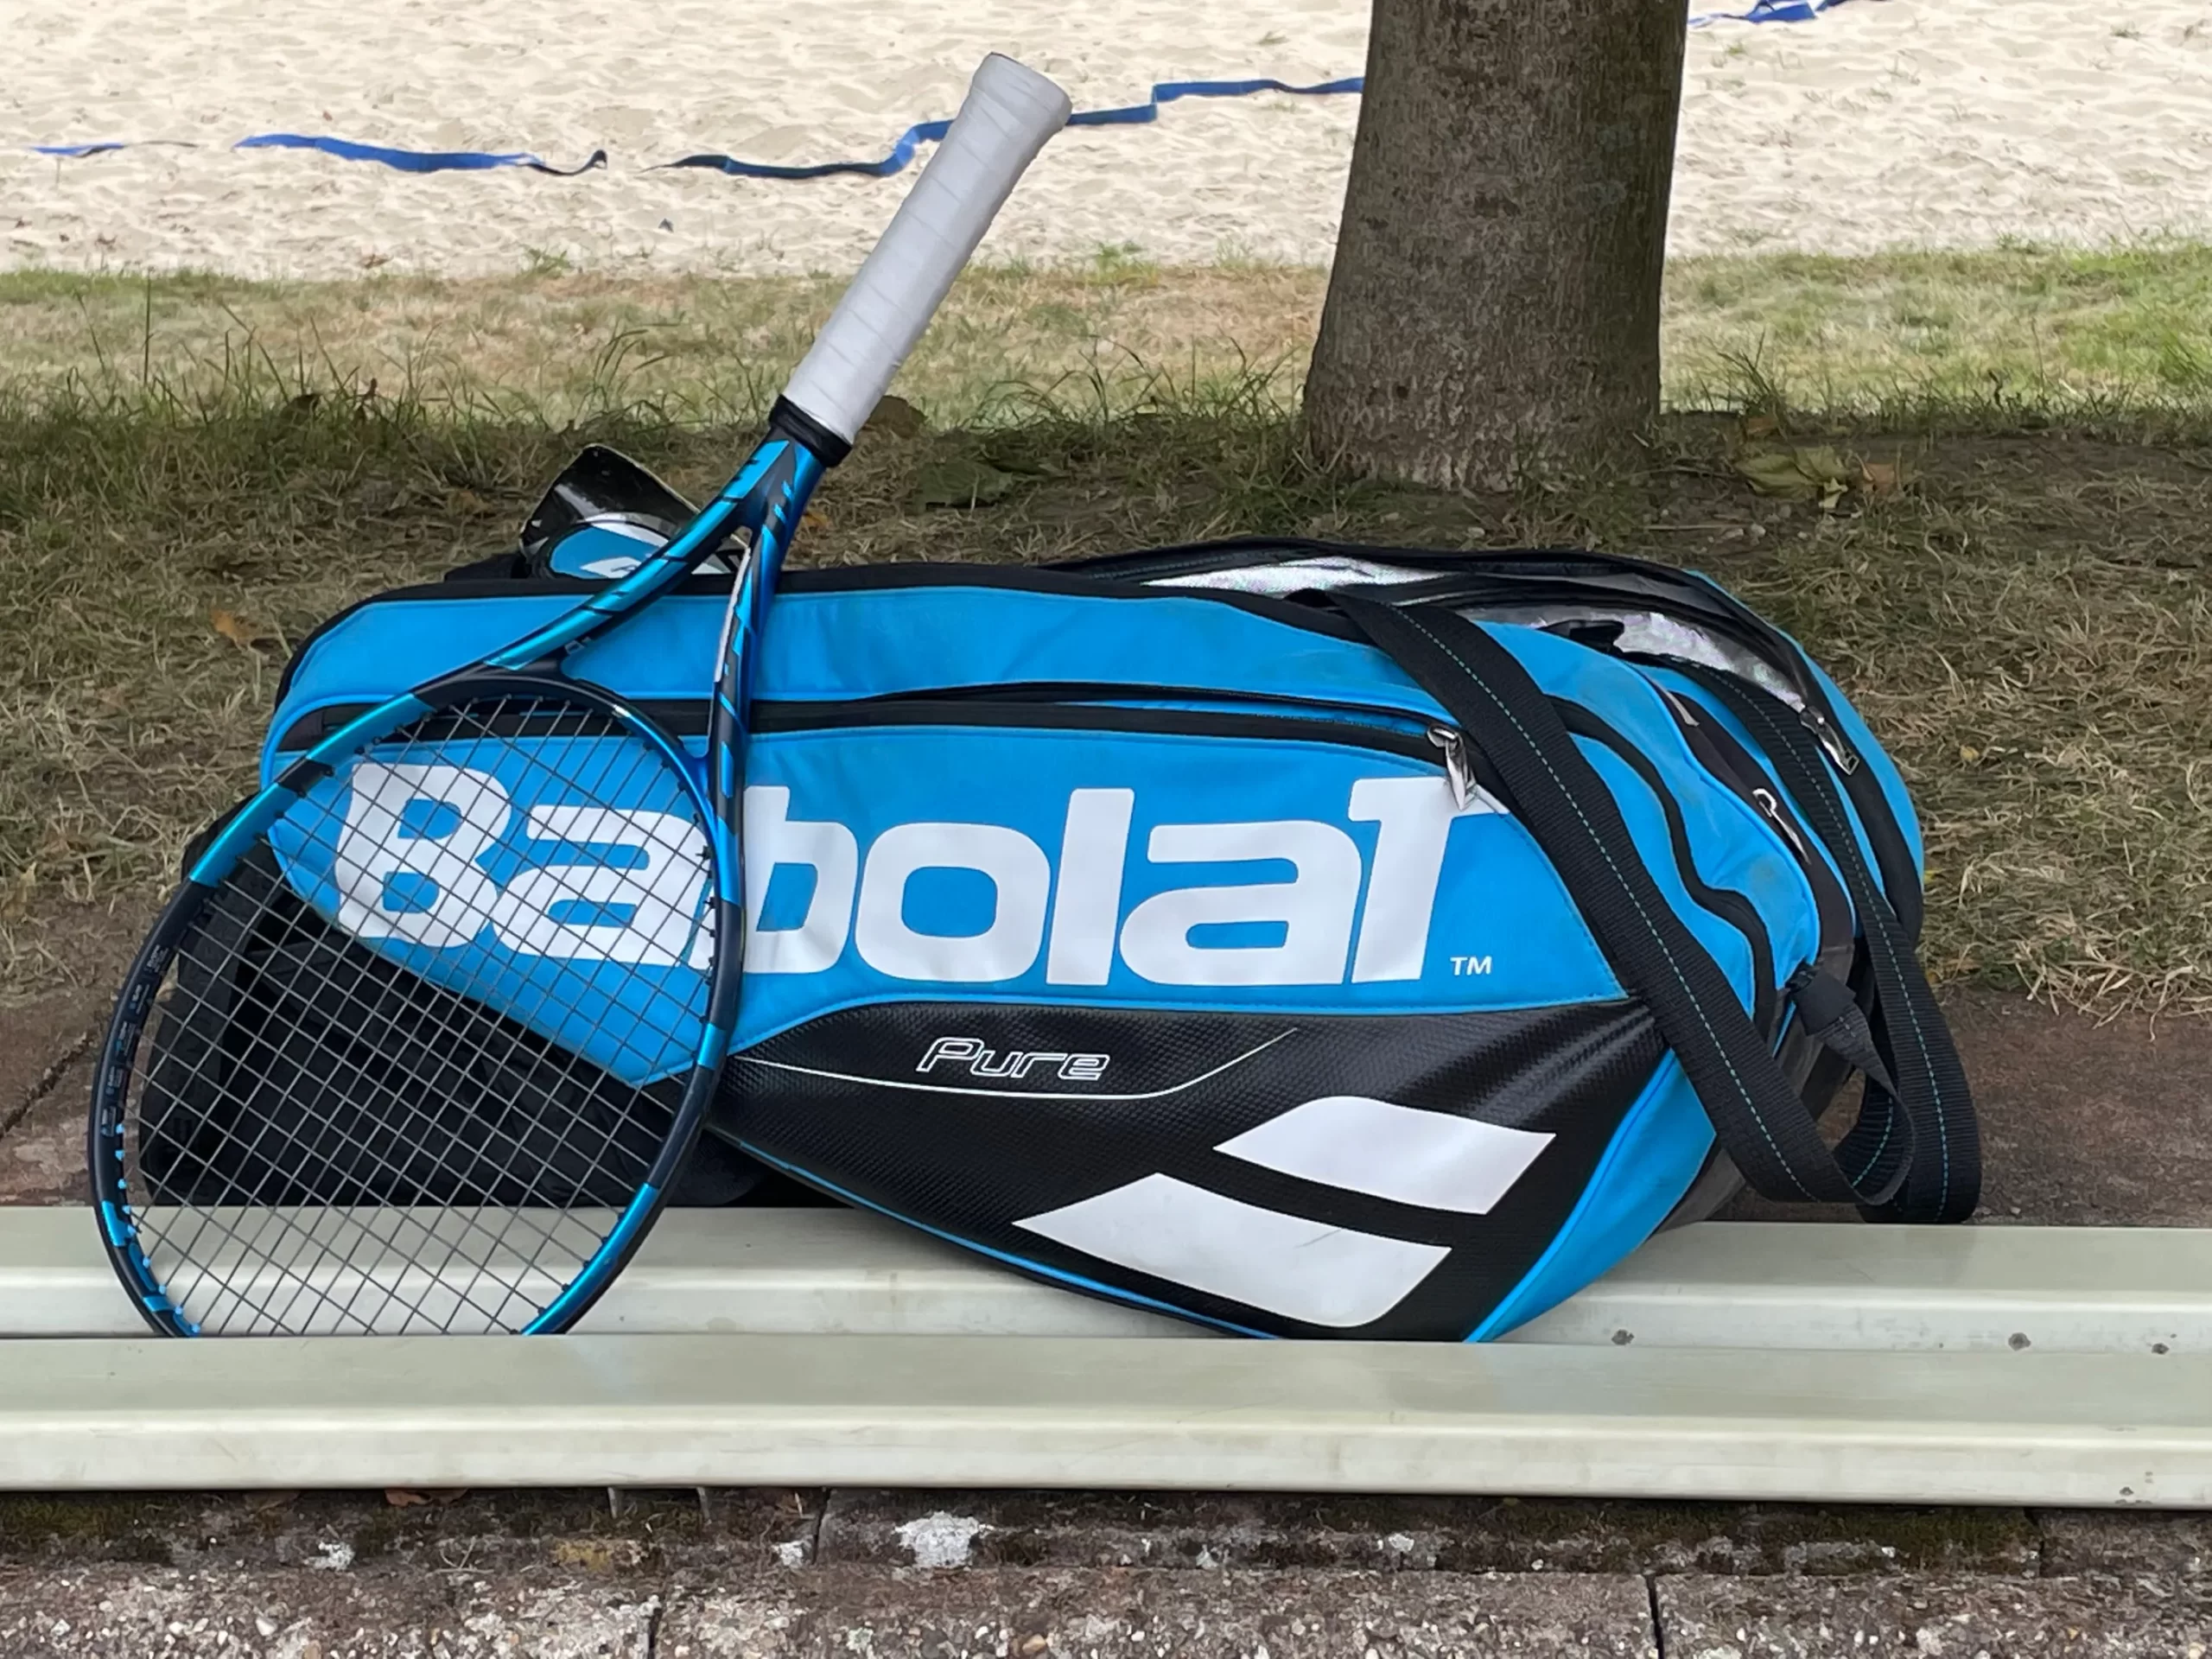 babolat pure drive review